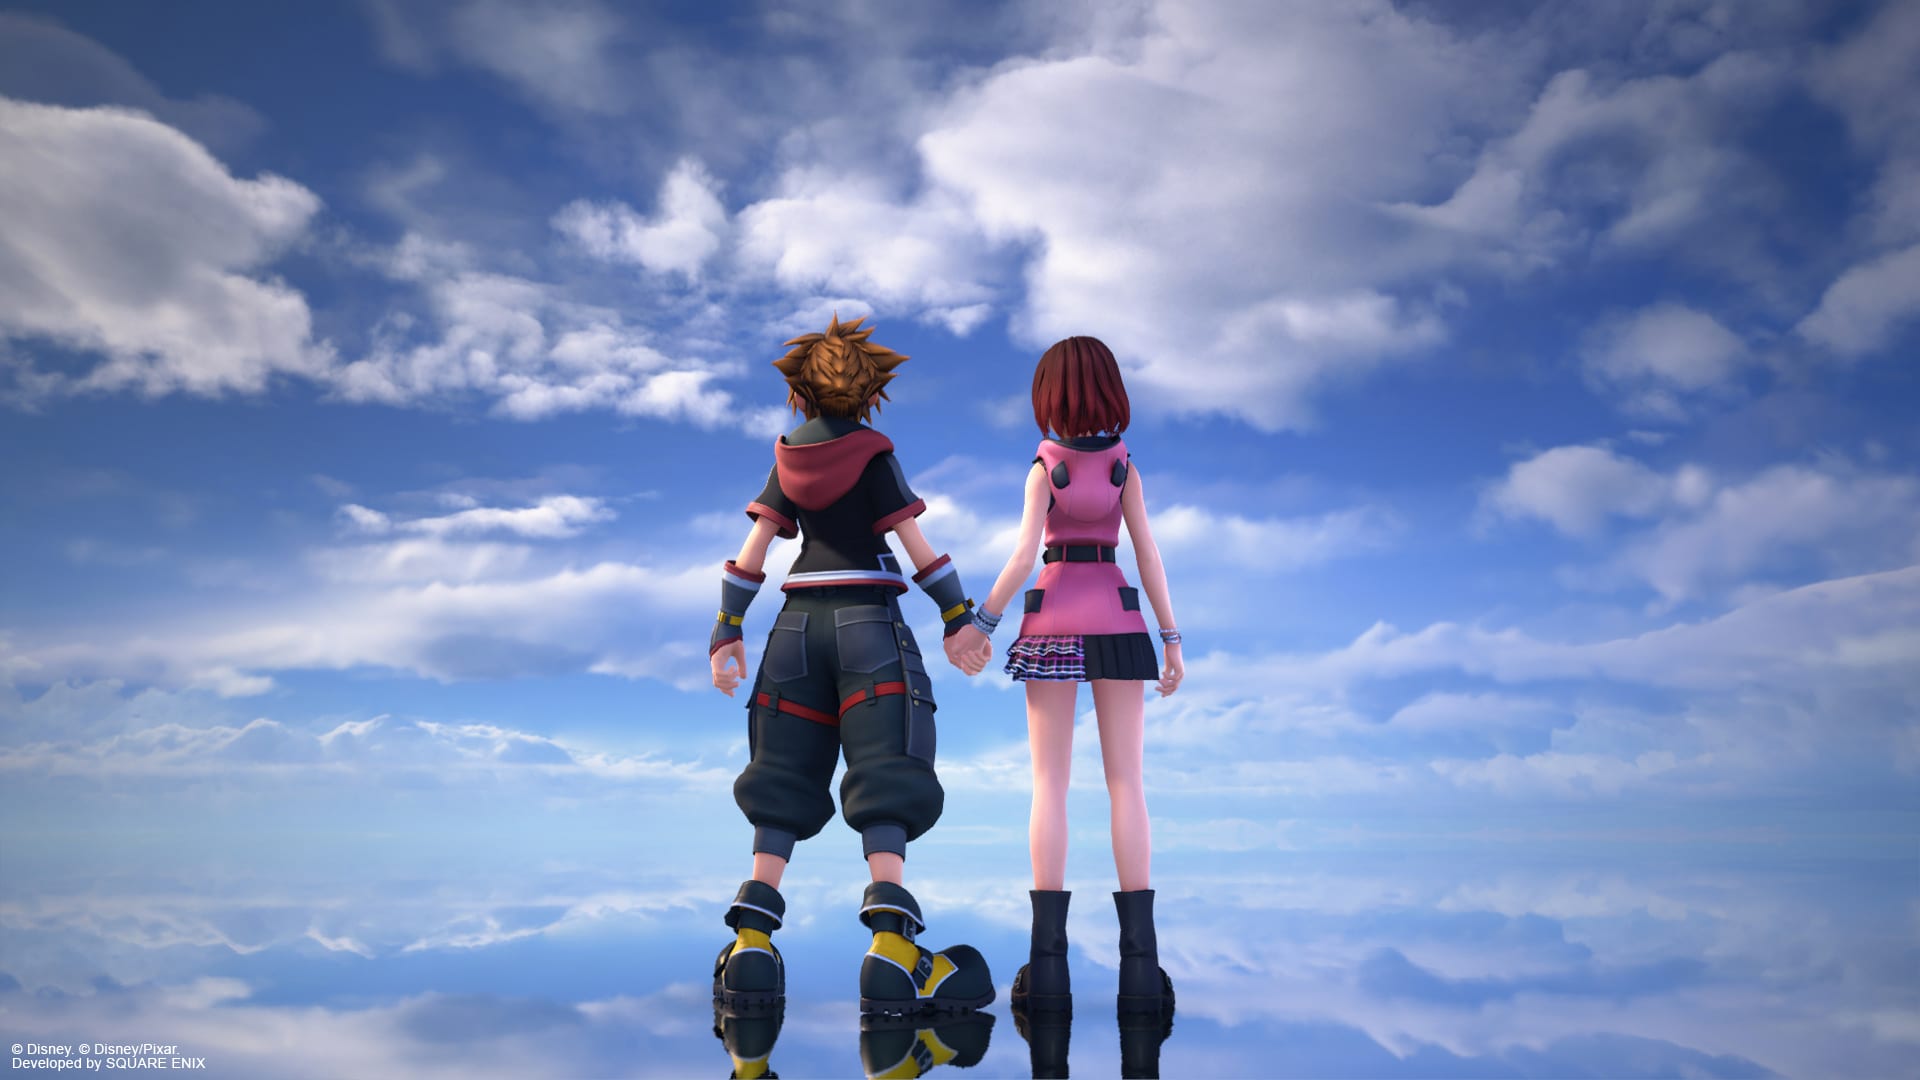 download the last version for apple KINGDOM HEARTS III и дополнение Re Mind